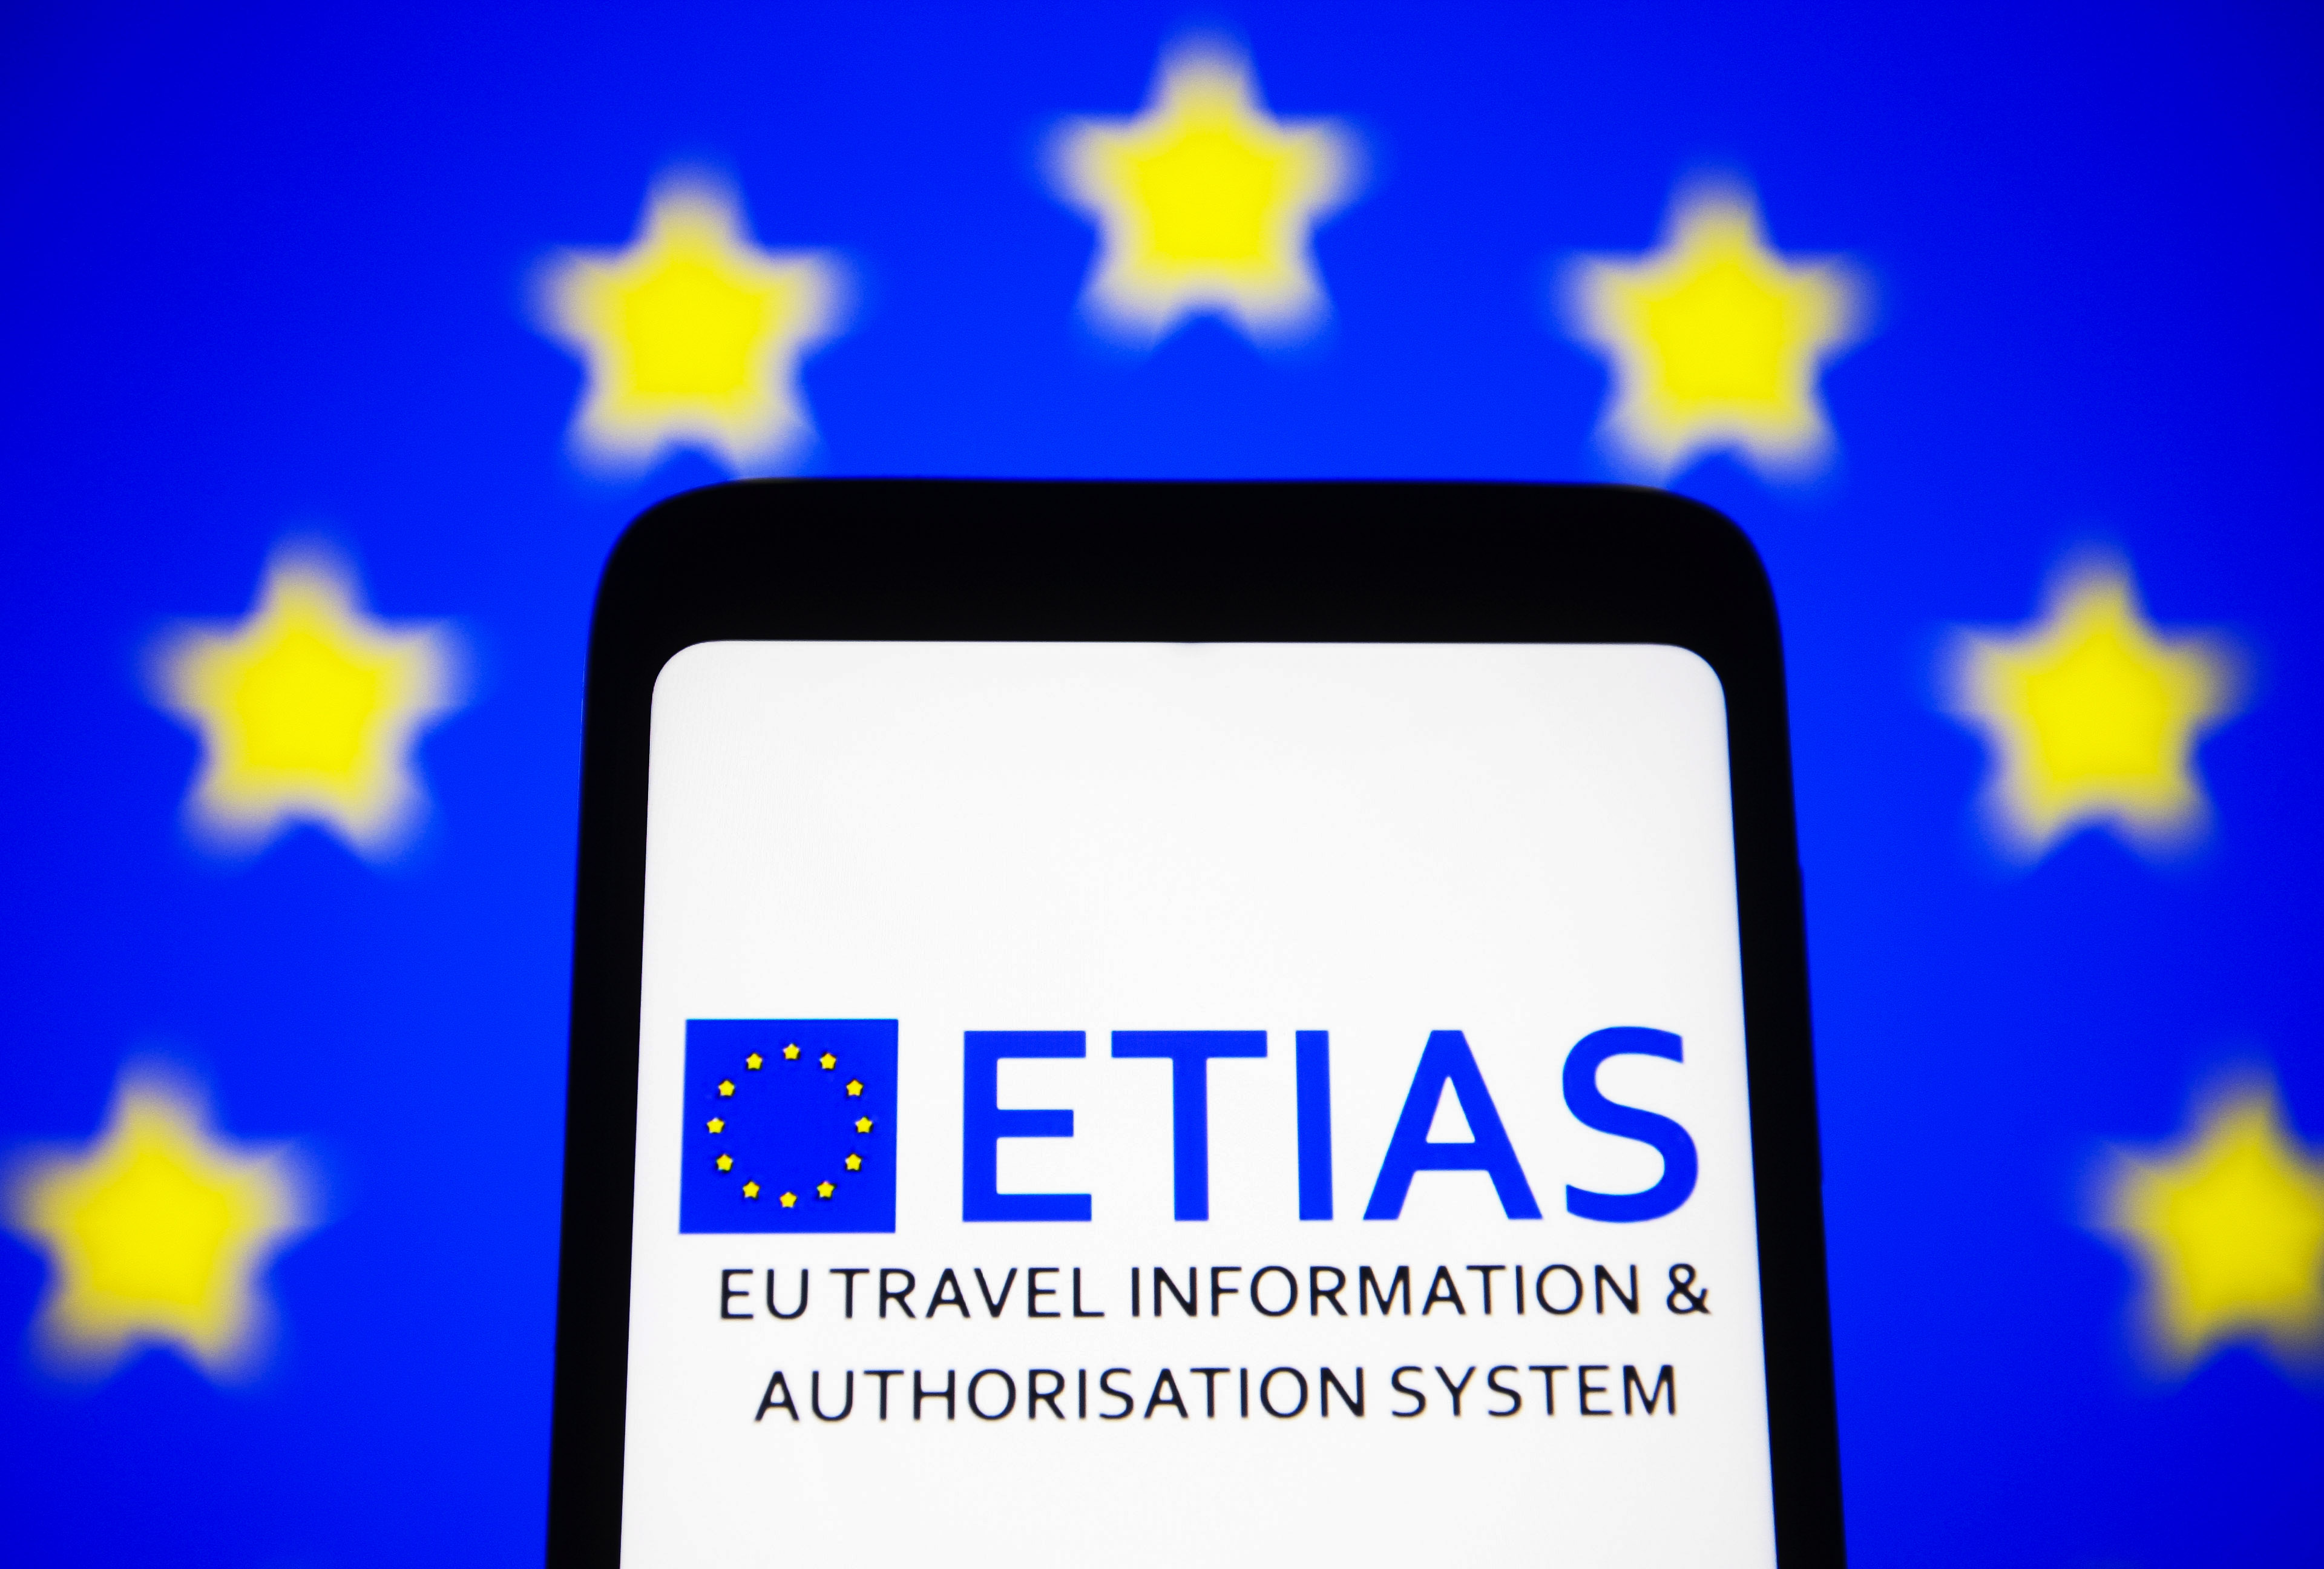 Part of a smartphone screen depicts the ETIAS logo in blue letters, with the European Union flag (blue with yellow stars) in the background.